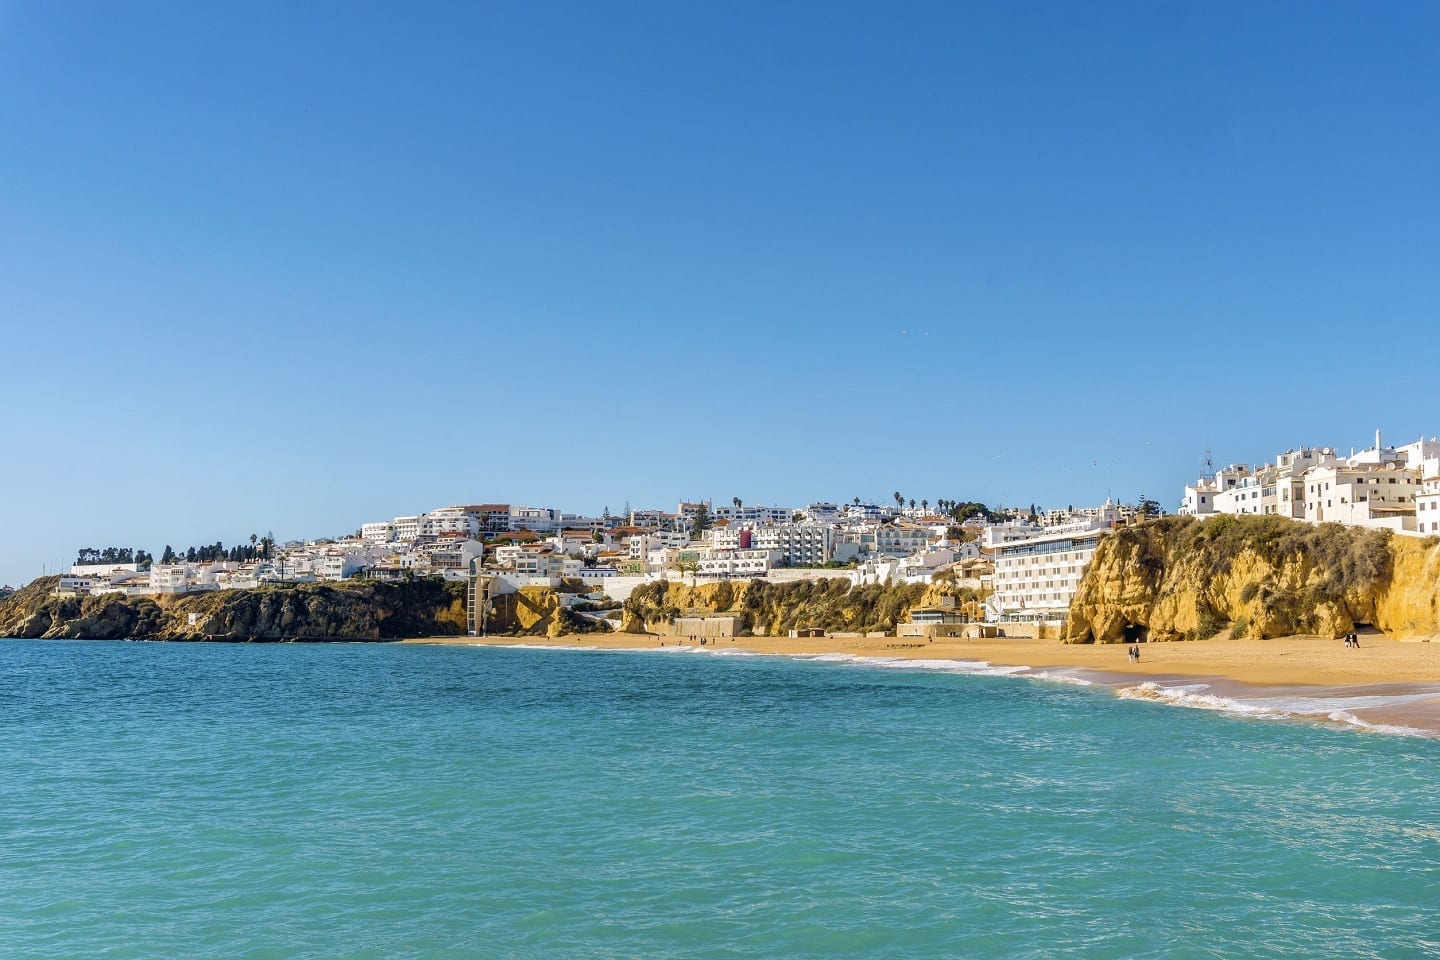 Best Lisbon to Albufeira Day Trip. Save - 60%